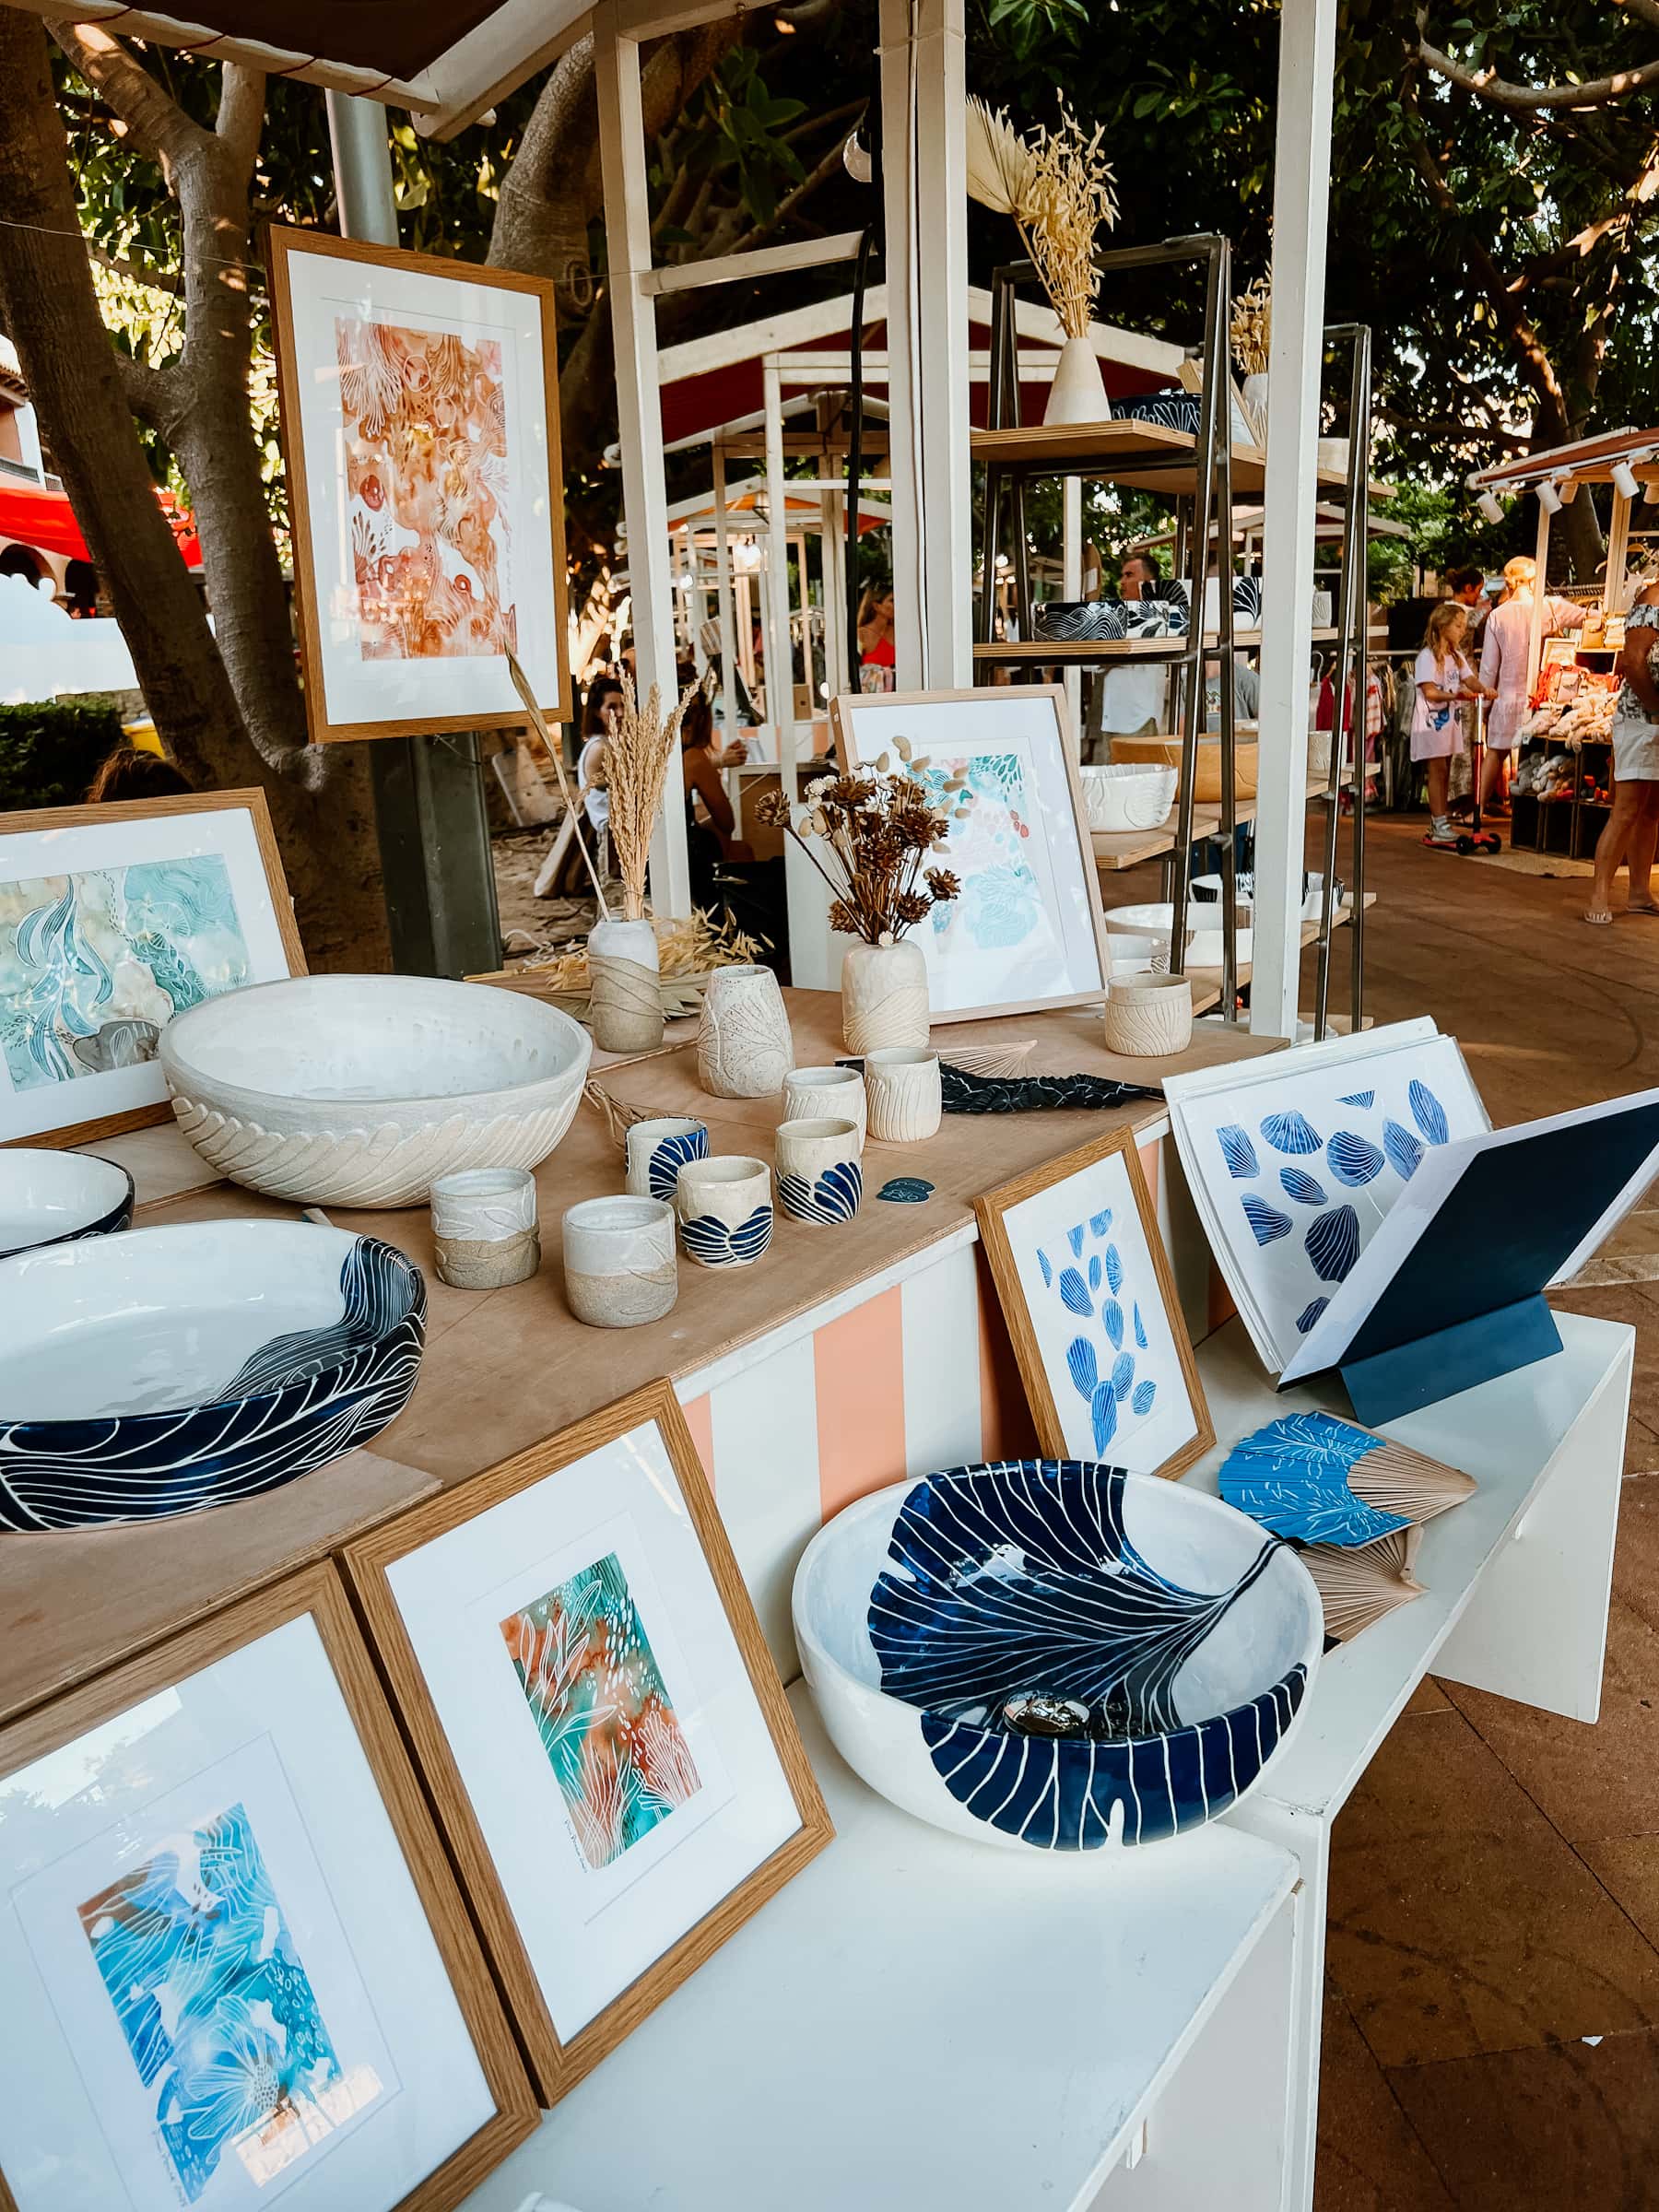 Arts and crafts at The Sunset Market in Puerto Portals Mallorca